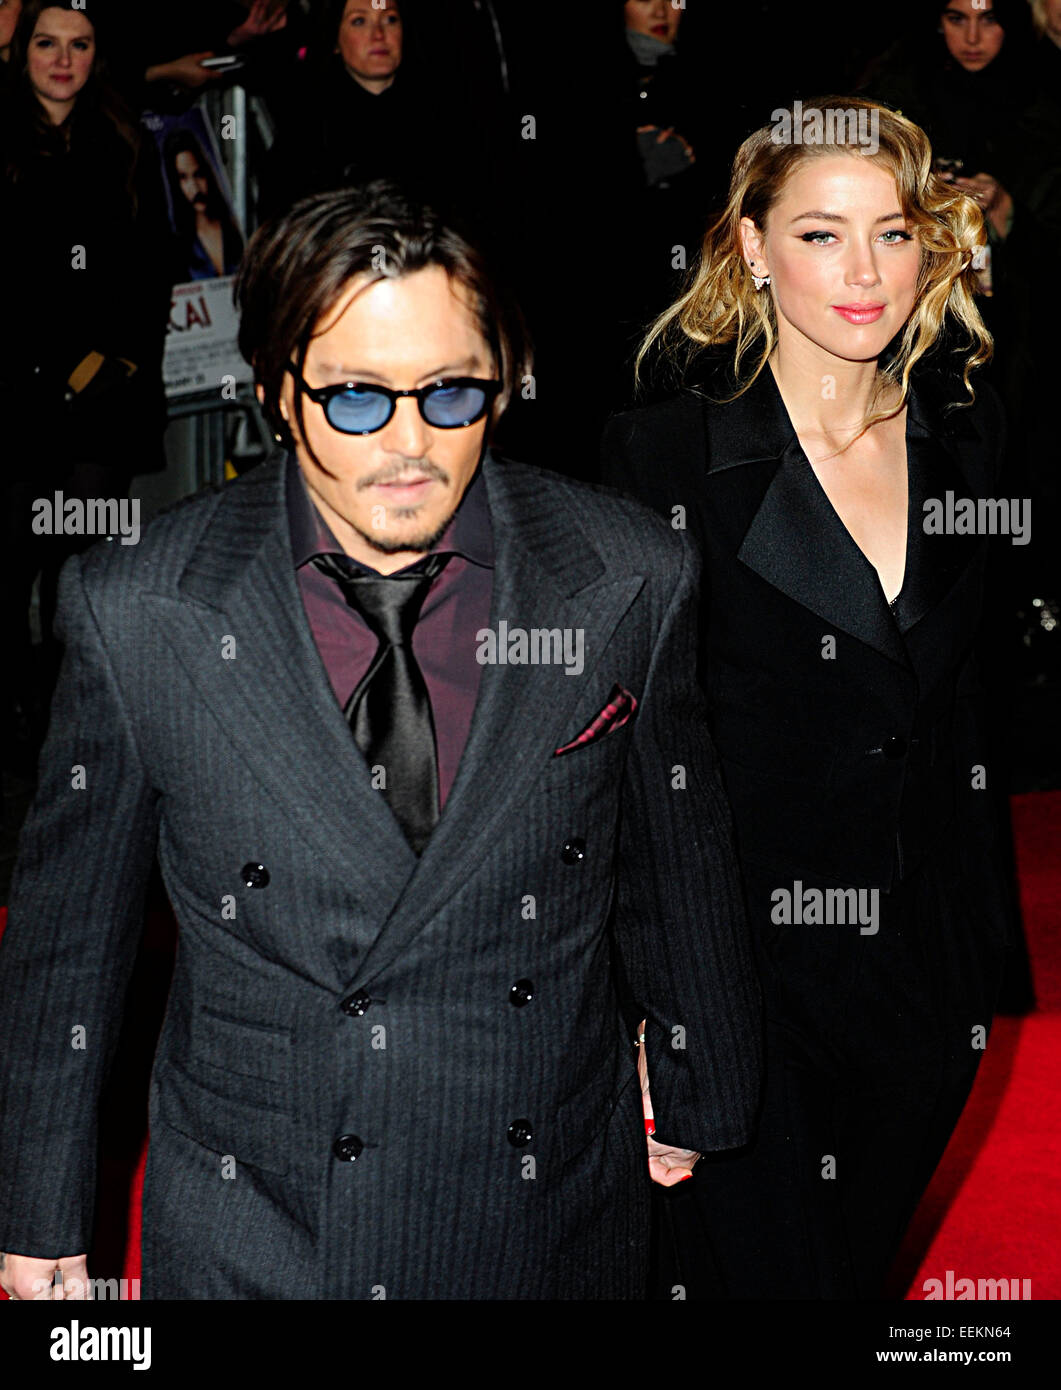 London, UK. 19th Jan, 2015. Johnny  Depp  attend UK Premiere of Mortdecai  at Empire  Leicester Square  London 19th January 2015Johnny  Depp & Amber Heard  attend UK Premiere of Mortdecai  at Empire  Leicester Square  London 19th January 2015 Credit:  Peter Phillips/Alamy Live News Stock Photo